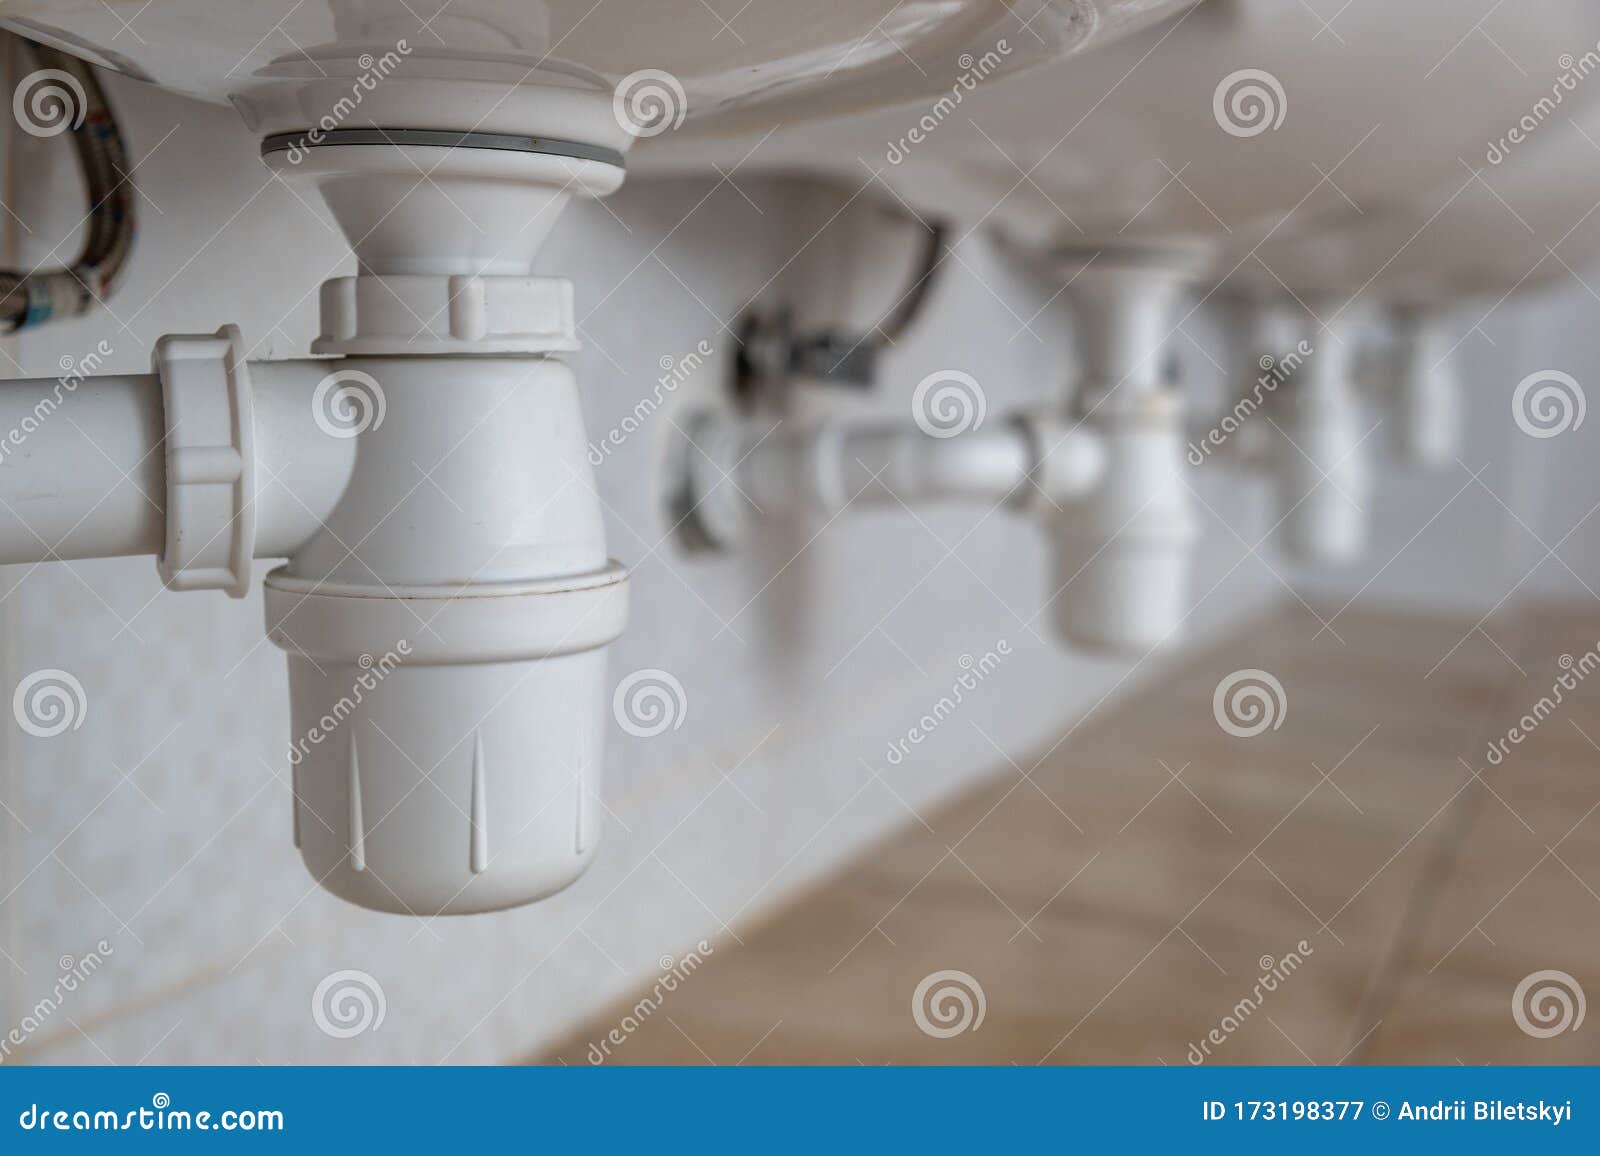 Close Up Of White Plastic Pipe Drain Under Washing Sink In Bathroom Stock Image Image Of Repair